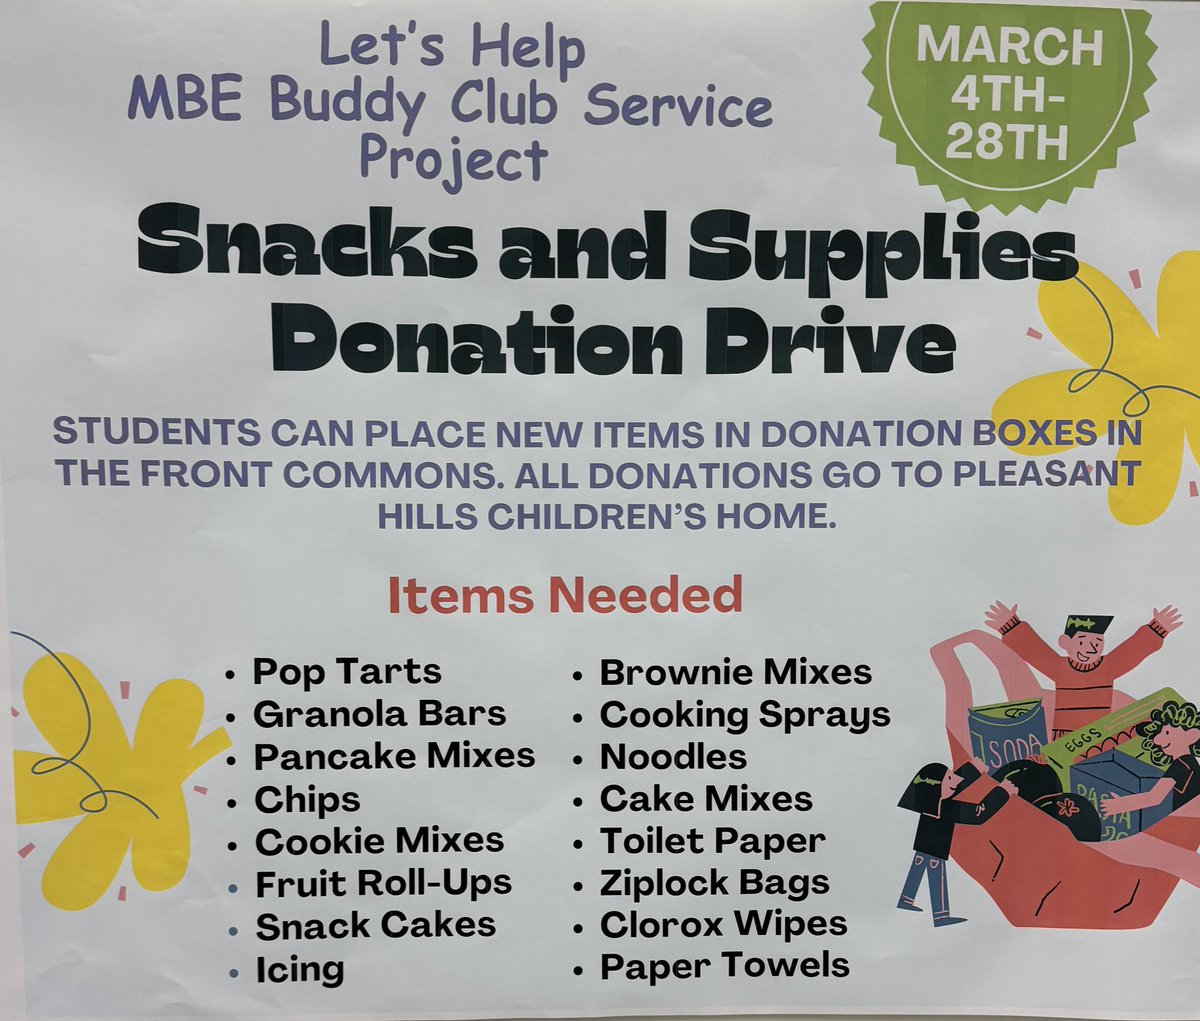 Our Be a Buddy Club @HumbleISD_MBE needs your help with our service project! Please consider helping us by donating an item listed below! ⤵️💜🐻 #shinealight #senditon #mbeisfamily #WeAreTheLight #nextkidup #HumbleISDFamily @HumbleISD @HumbleISD_CBS